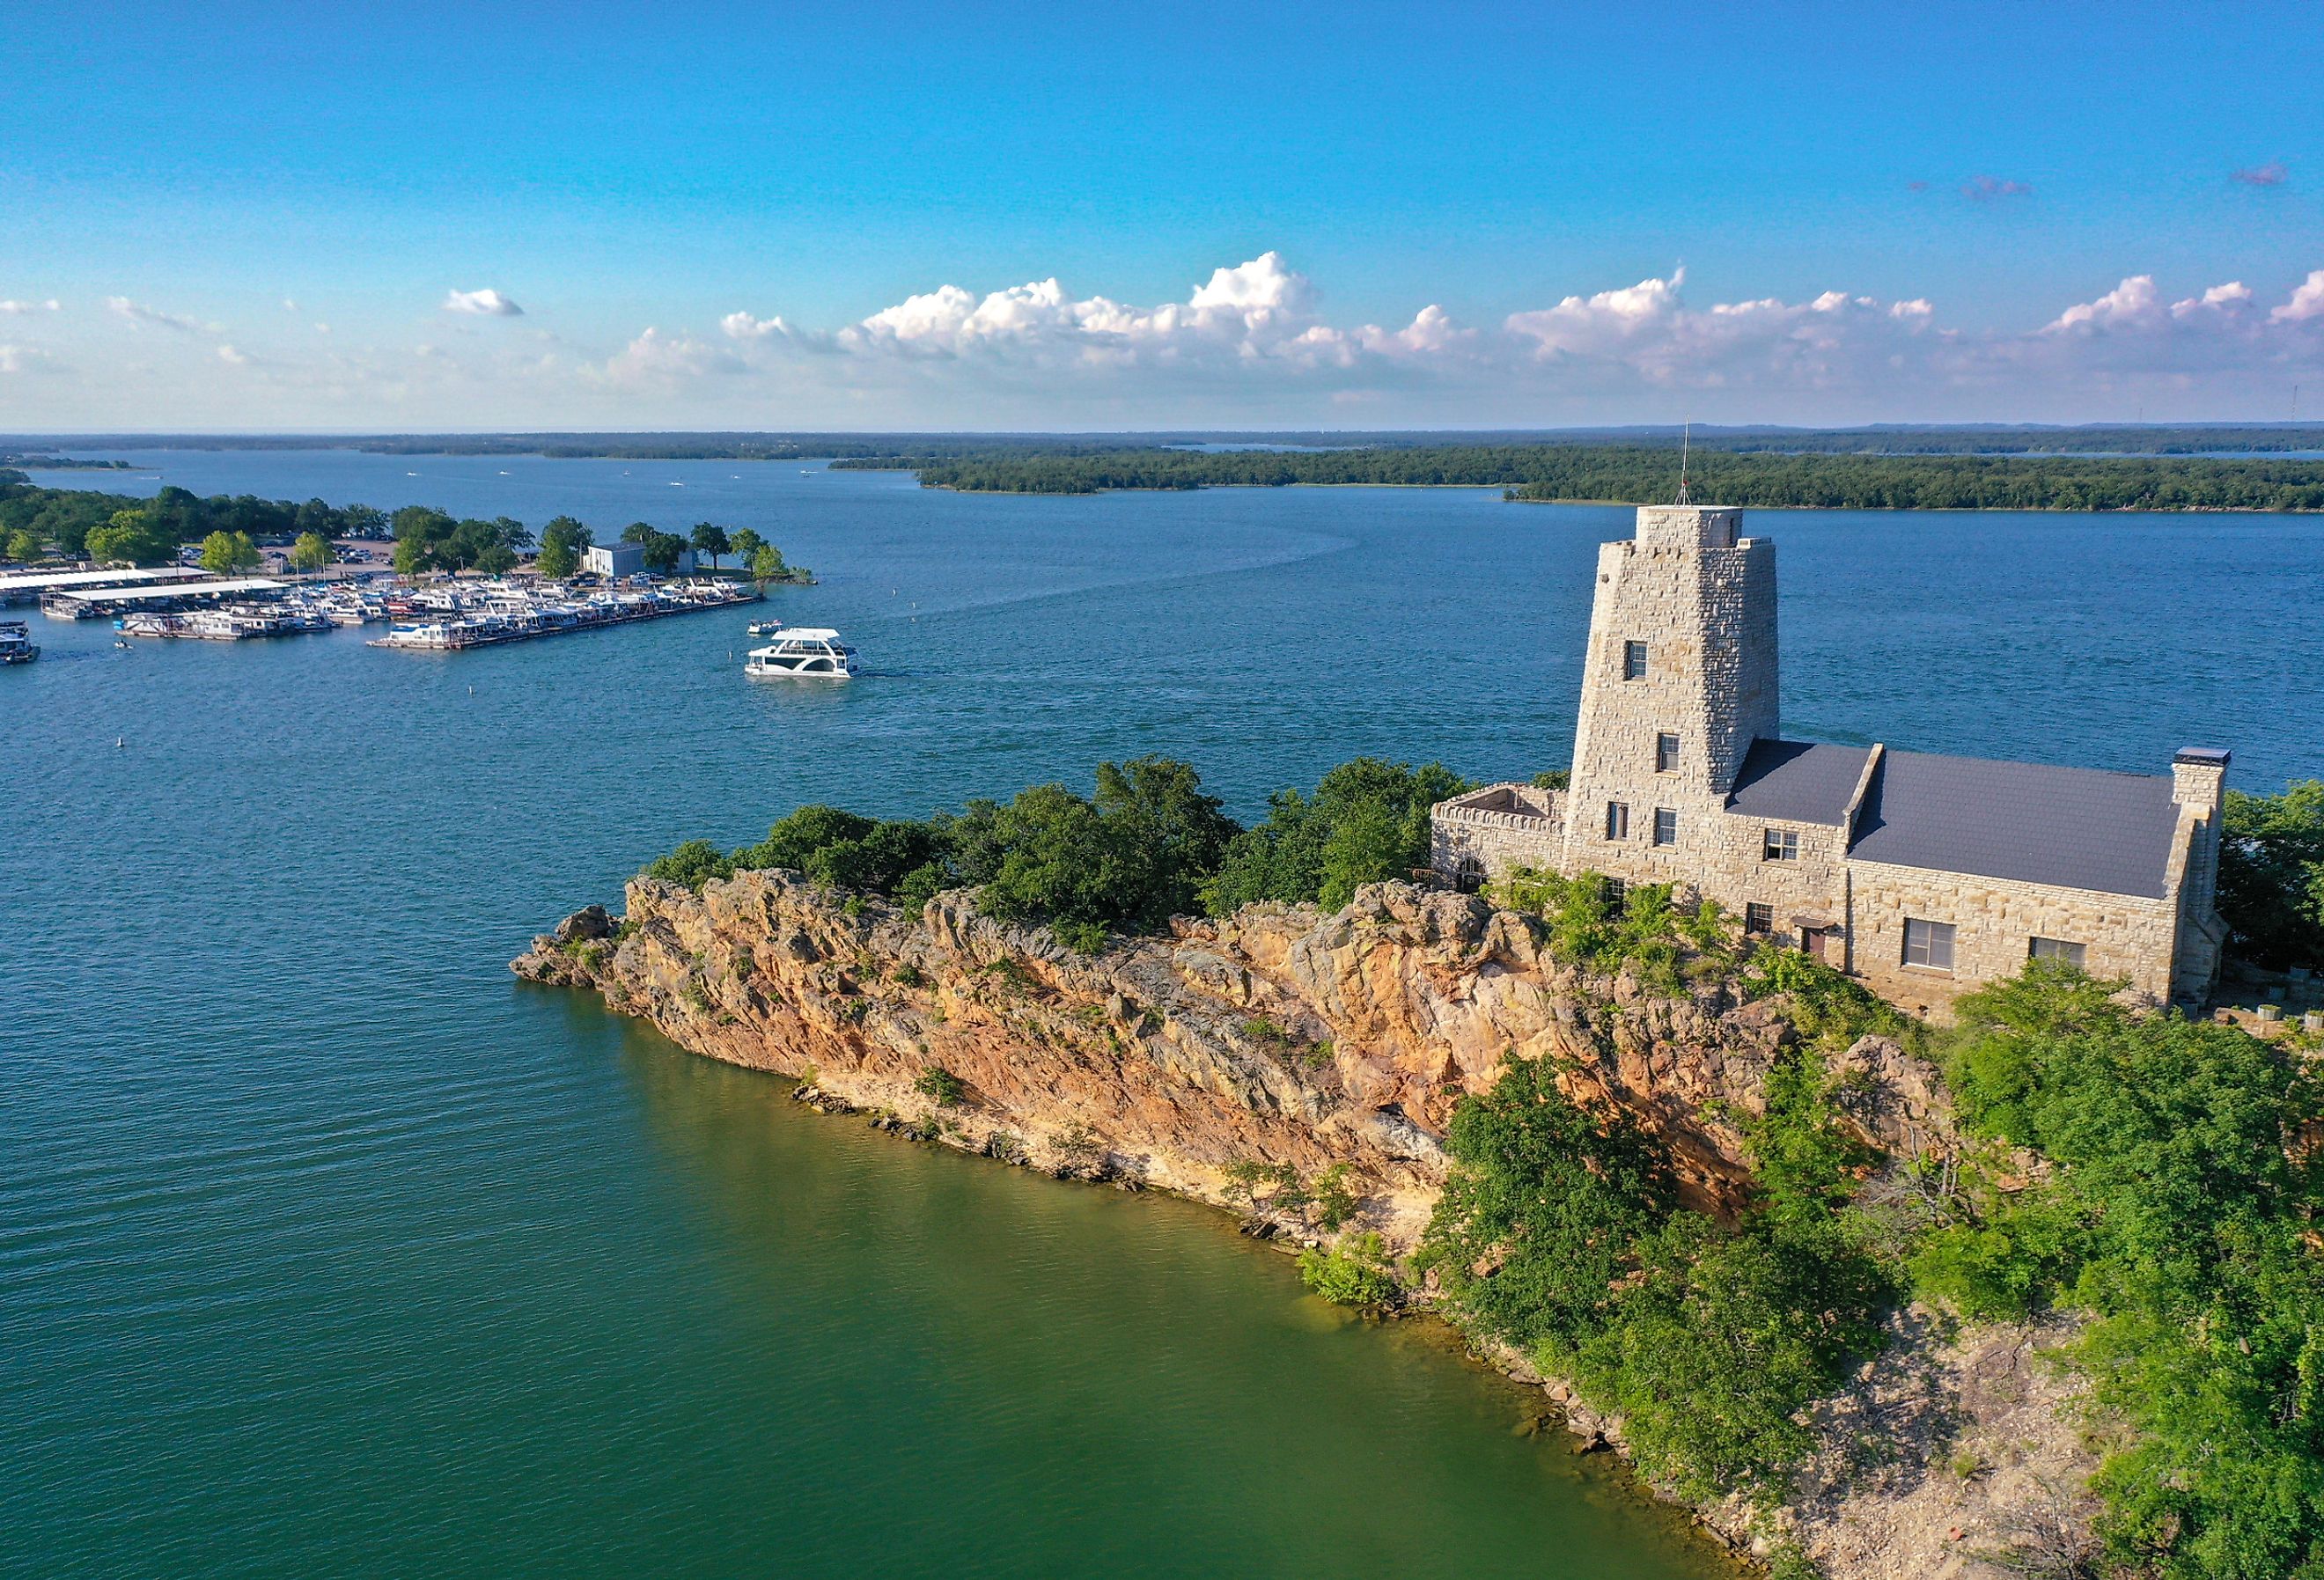 Aerial view of Tucker Tower on Lake Murray in Ardmore Oklahoma on a summer day with a houseboat in the distance.